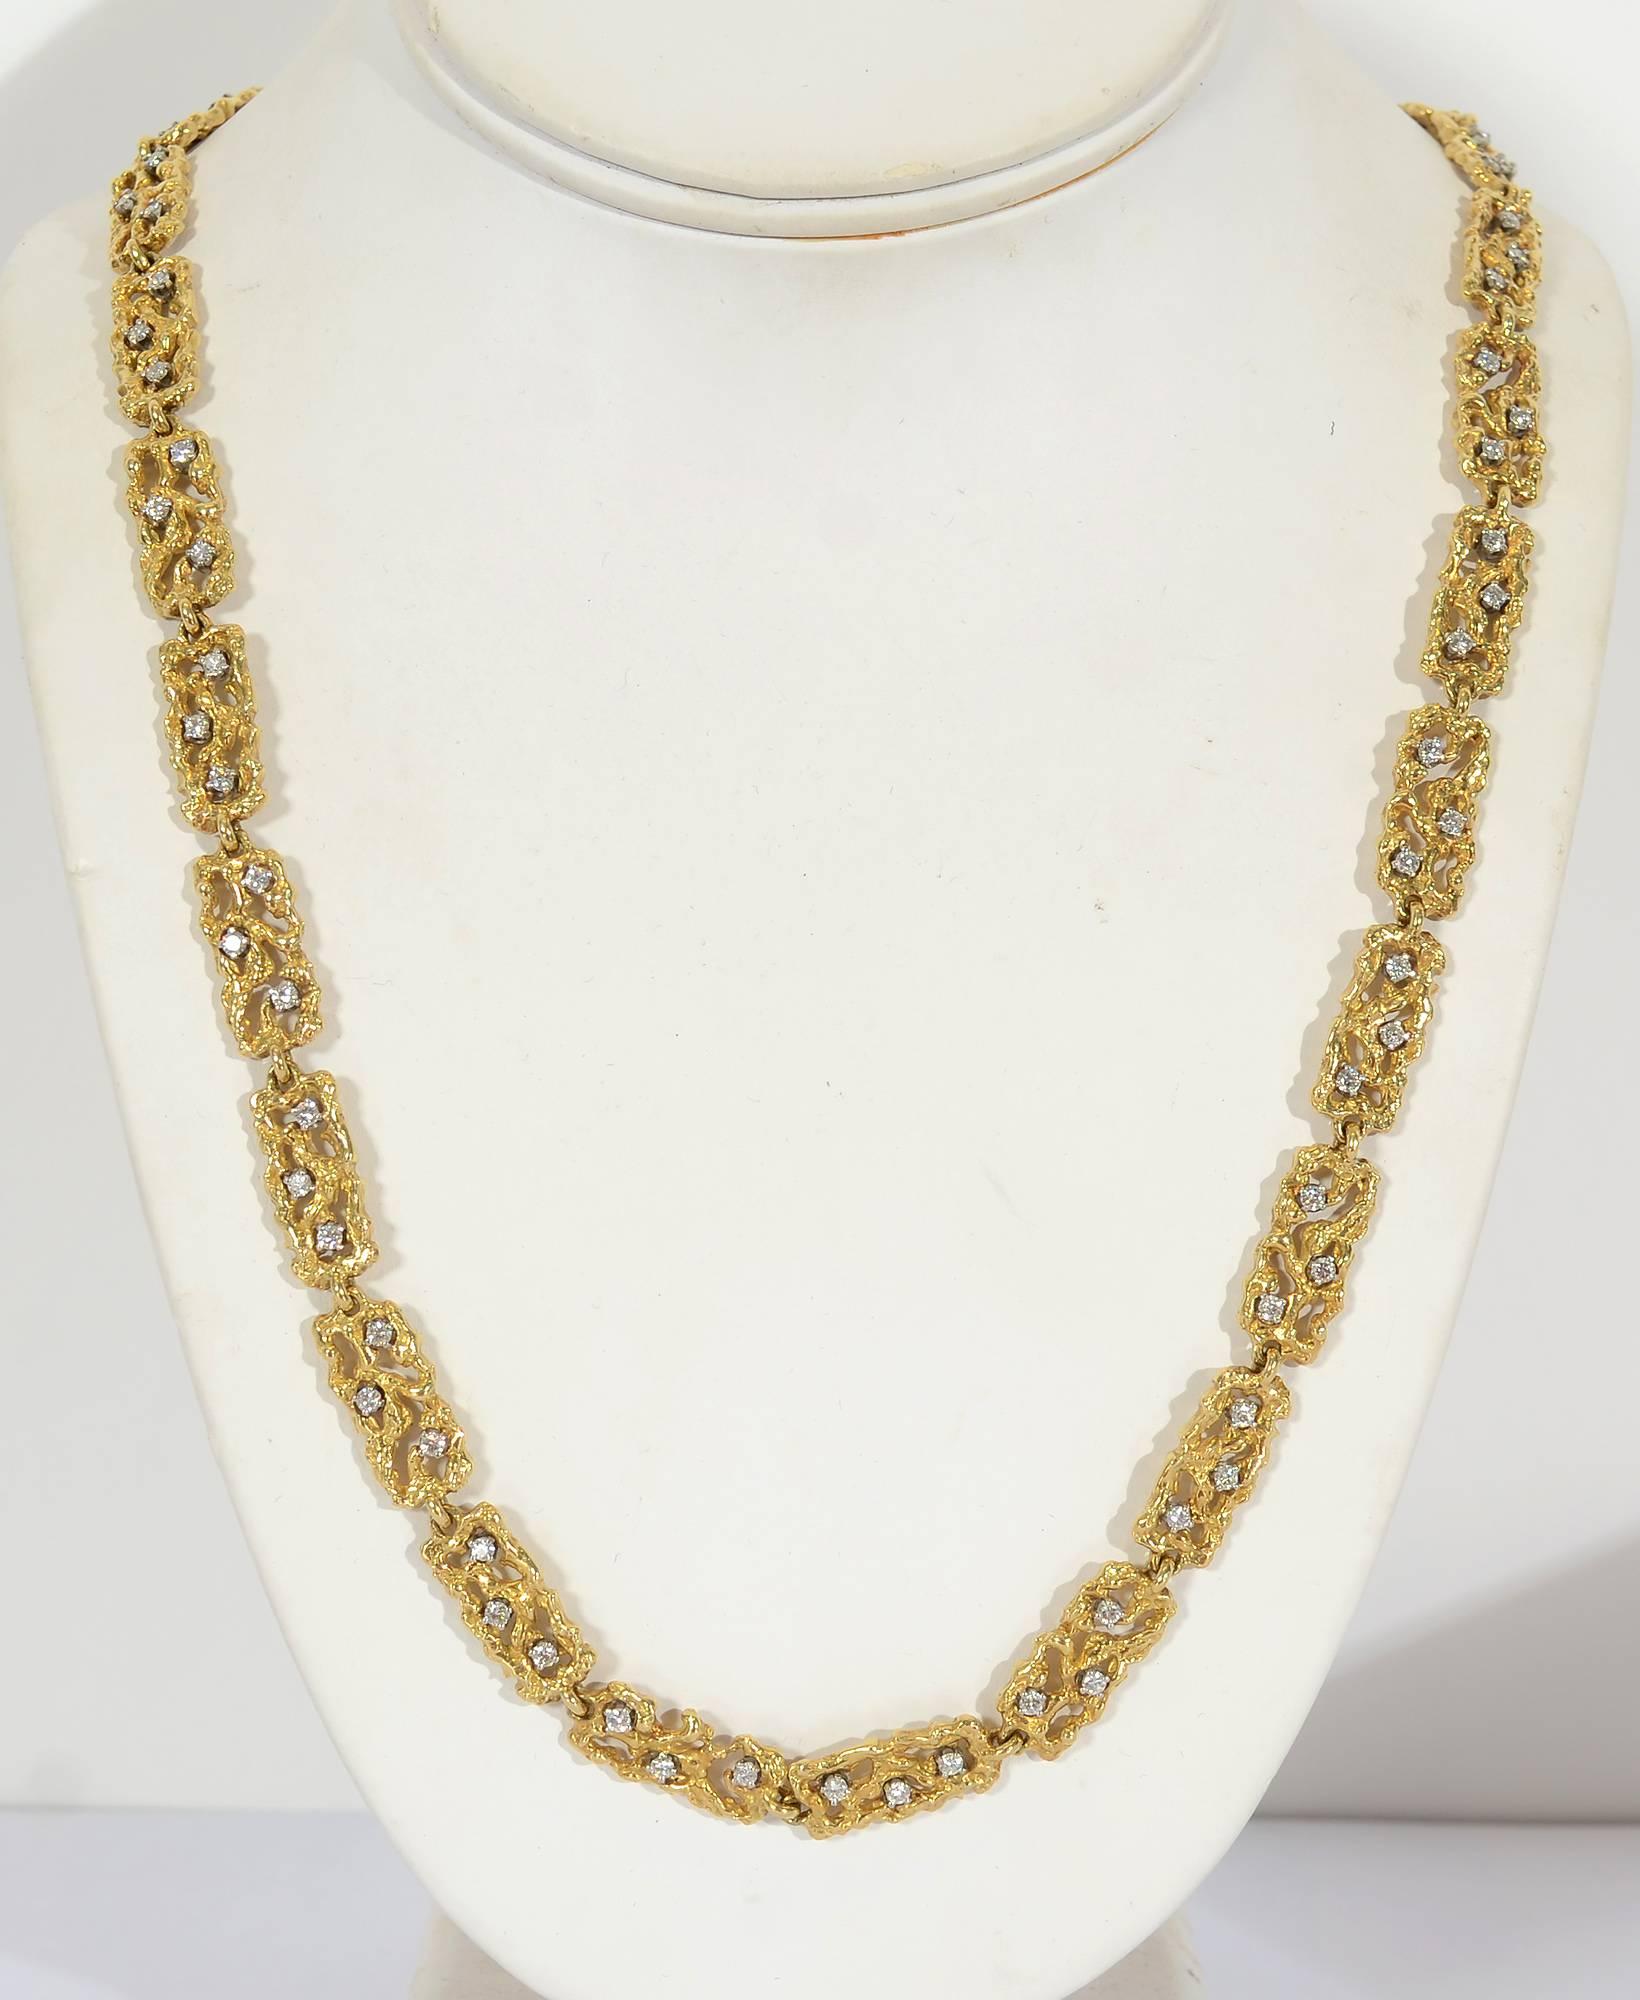 Boris Le Beau gold chain necklace with openwork rectangular links. Each has three round diamonds with a total weight of approximately 3.2 carats. Length is 24 inches; width is 3/8